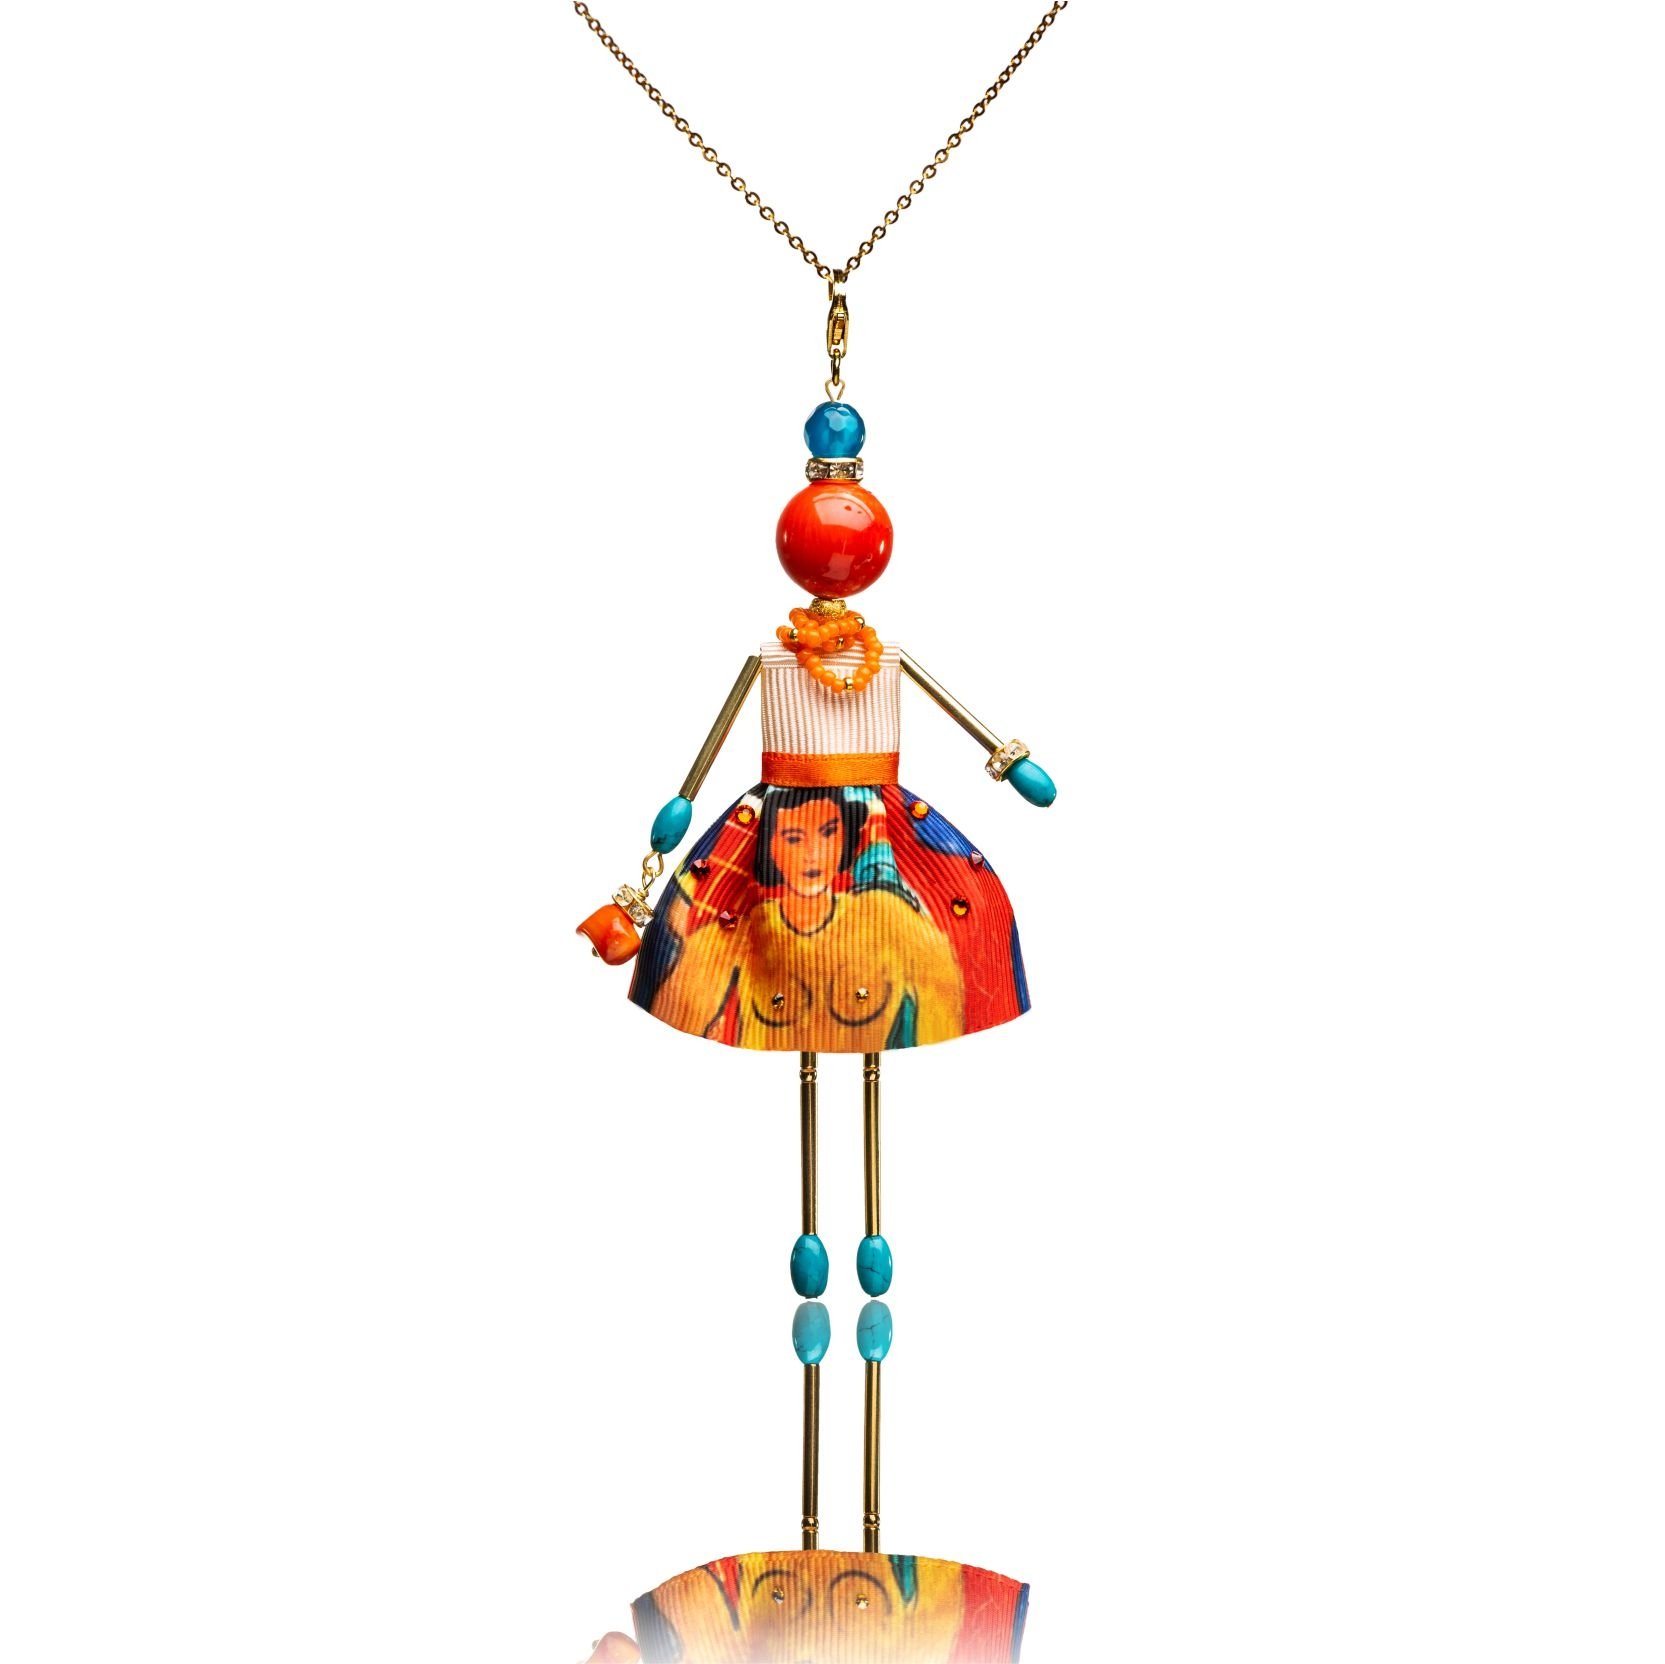 Doll-pendant with orange coral based on the painting by Henri Matisse "Music"